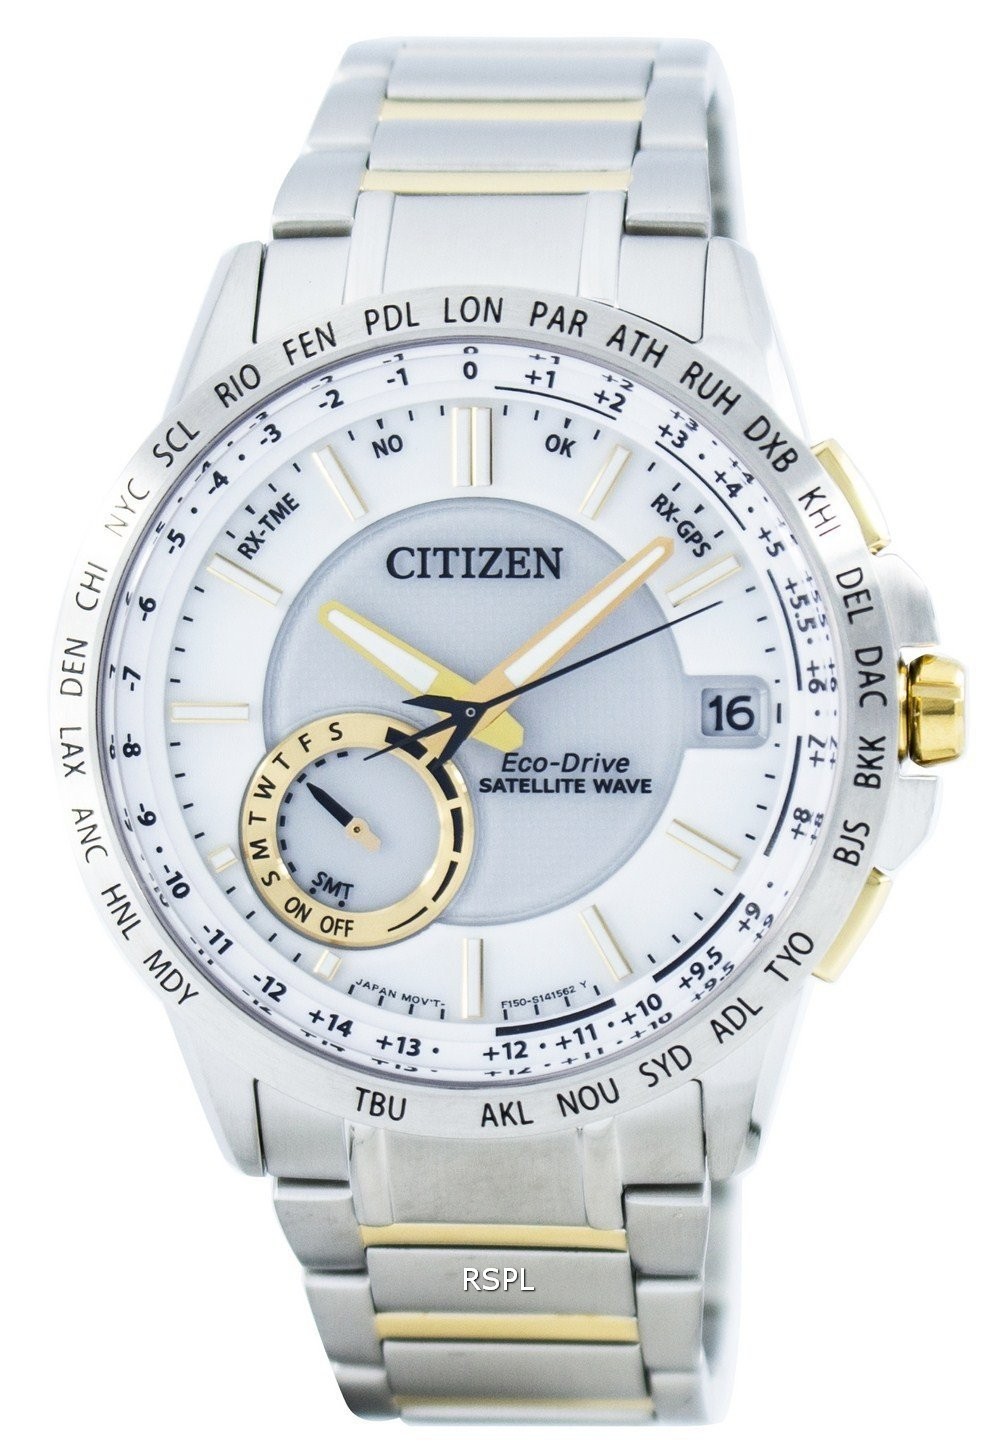 Citizen Eco-Drive Satellite Wave GPS World Time CC3004-53A Men’s Watch.jpg  by citywatchesnz